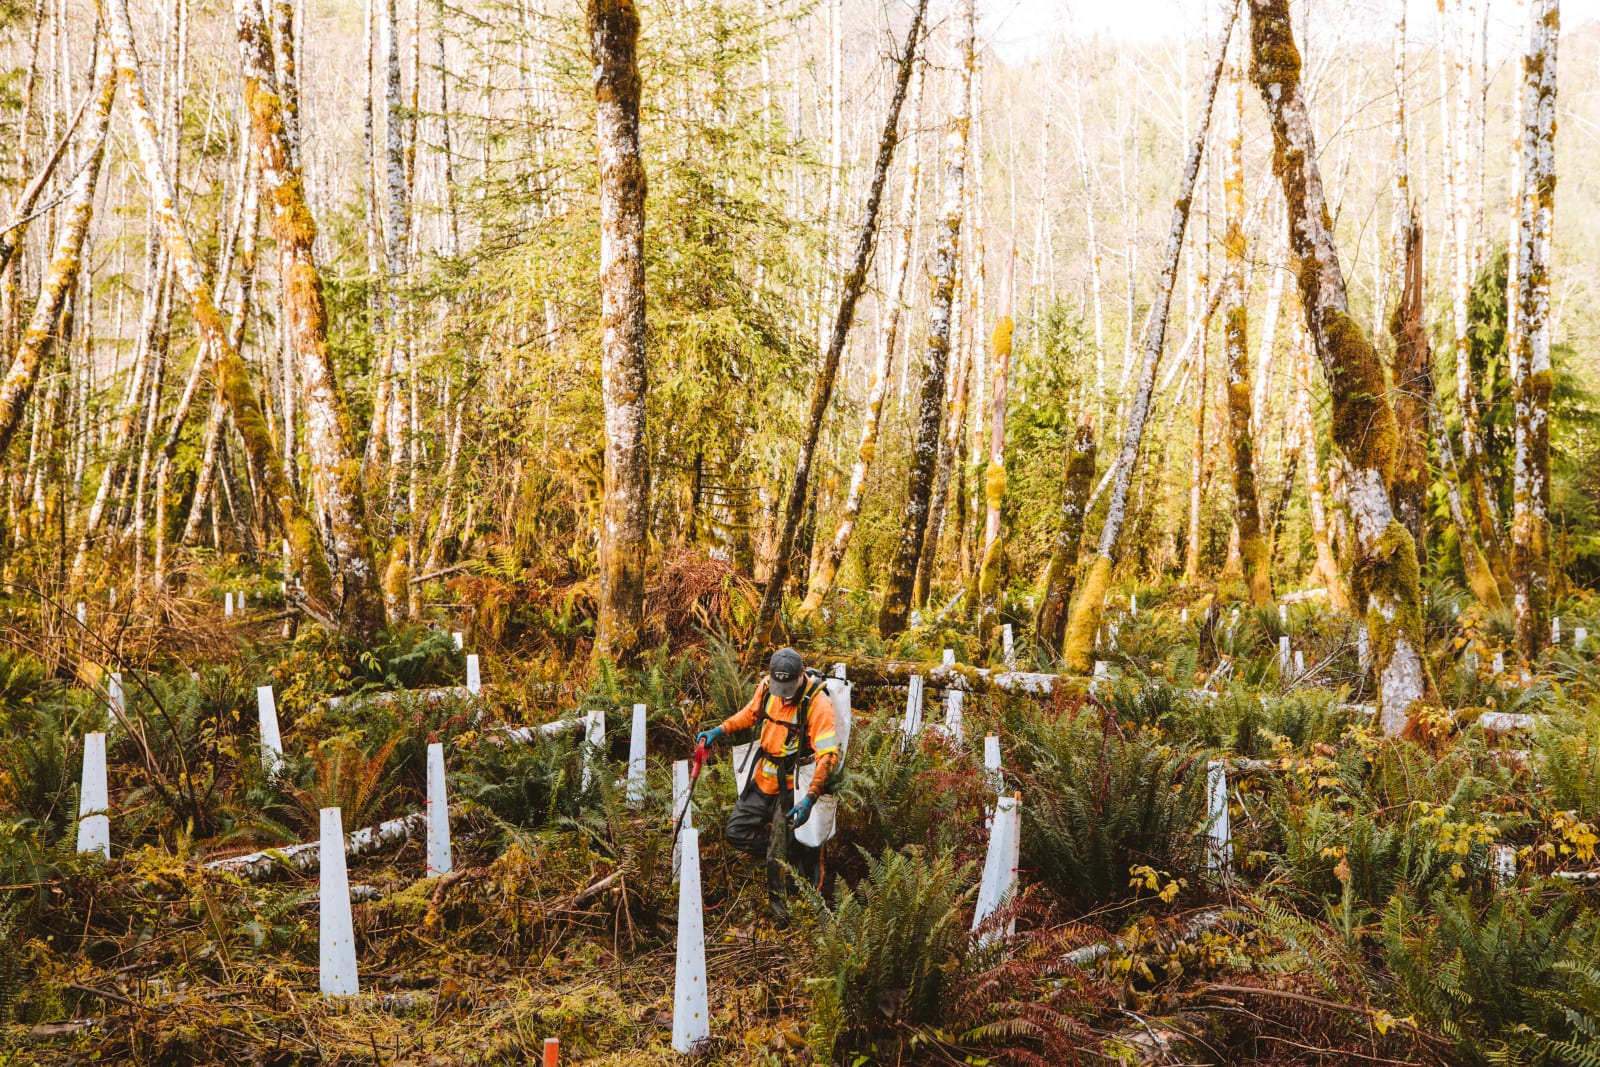 Man in high-vis gear in a forest planting trees